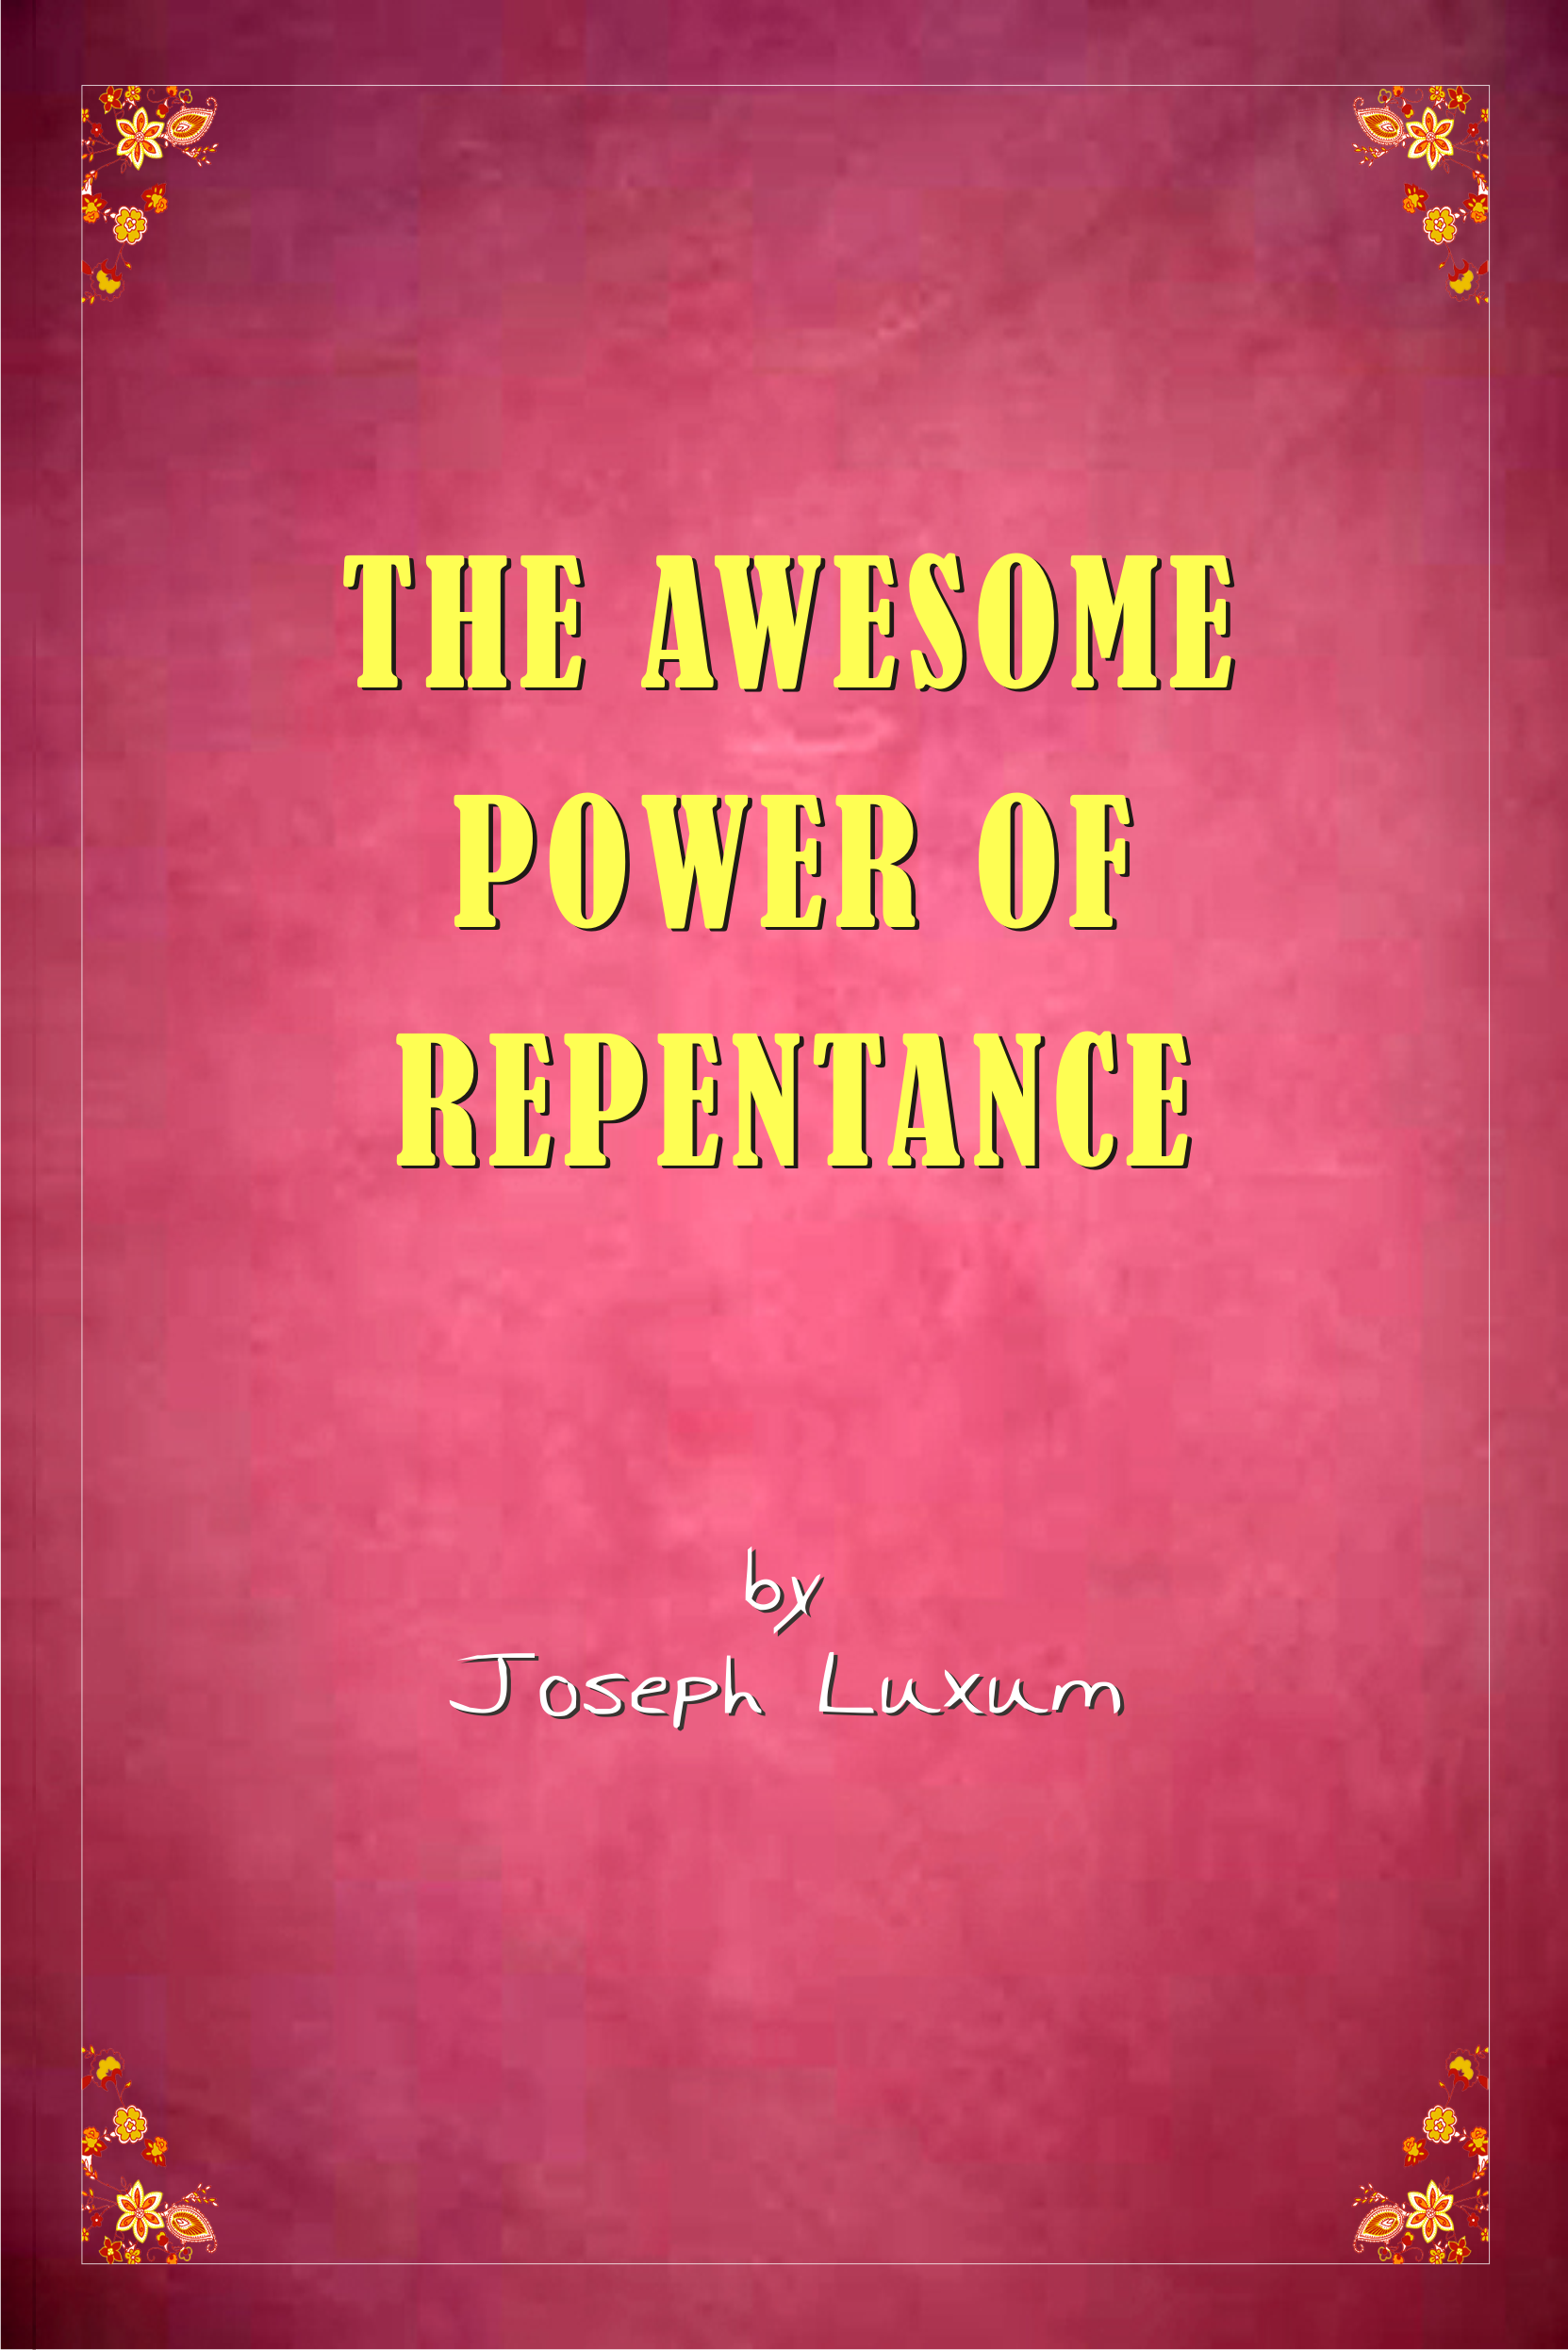 The Awesome Power of Repentance